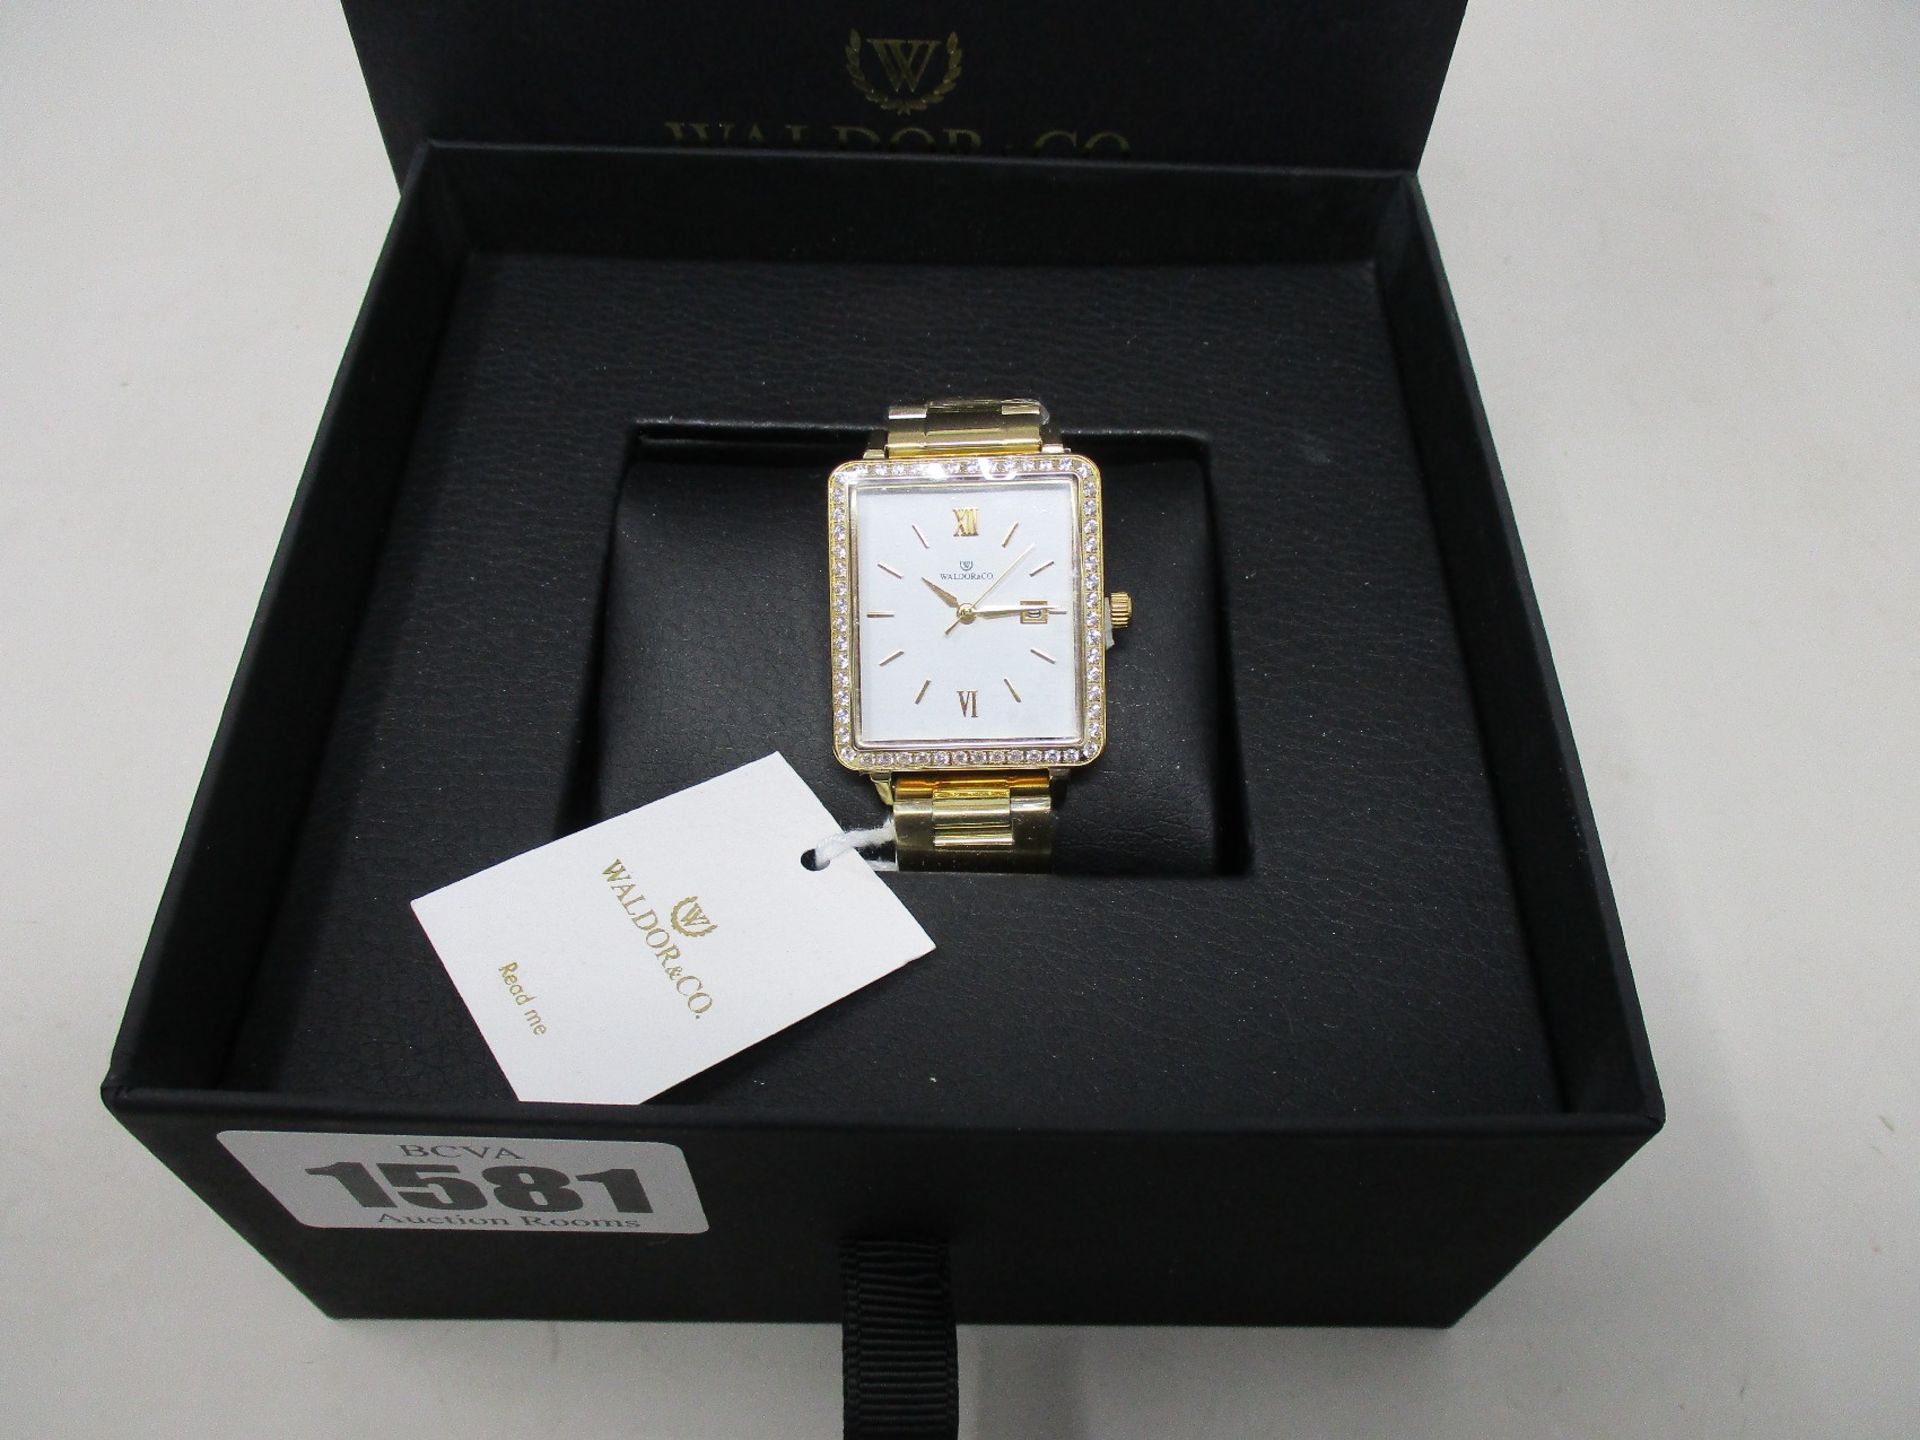 A boxed as new Waldorf & Co Delight 32 Mayfair watch.